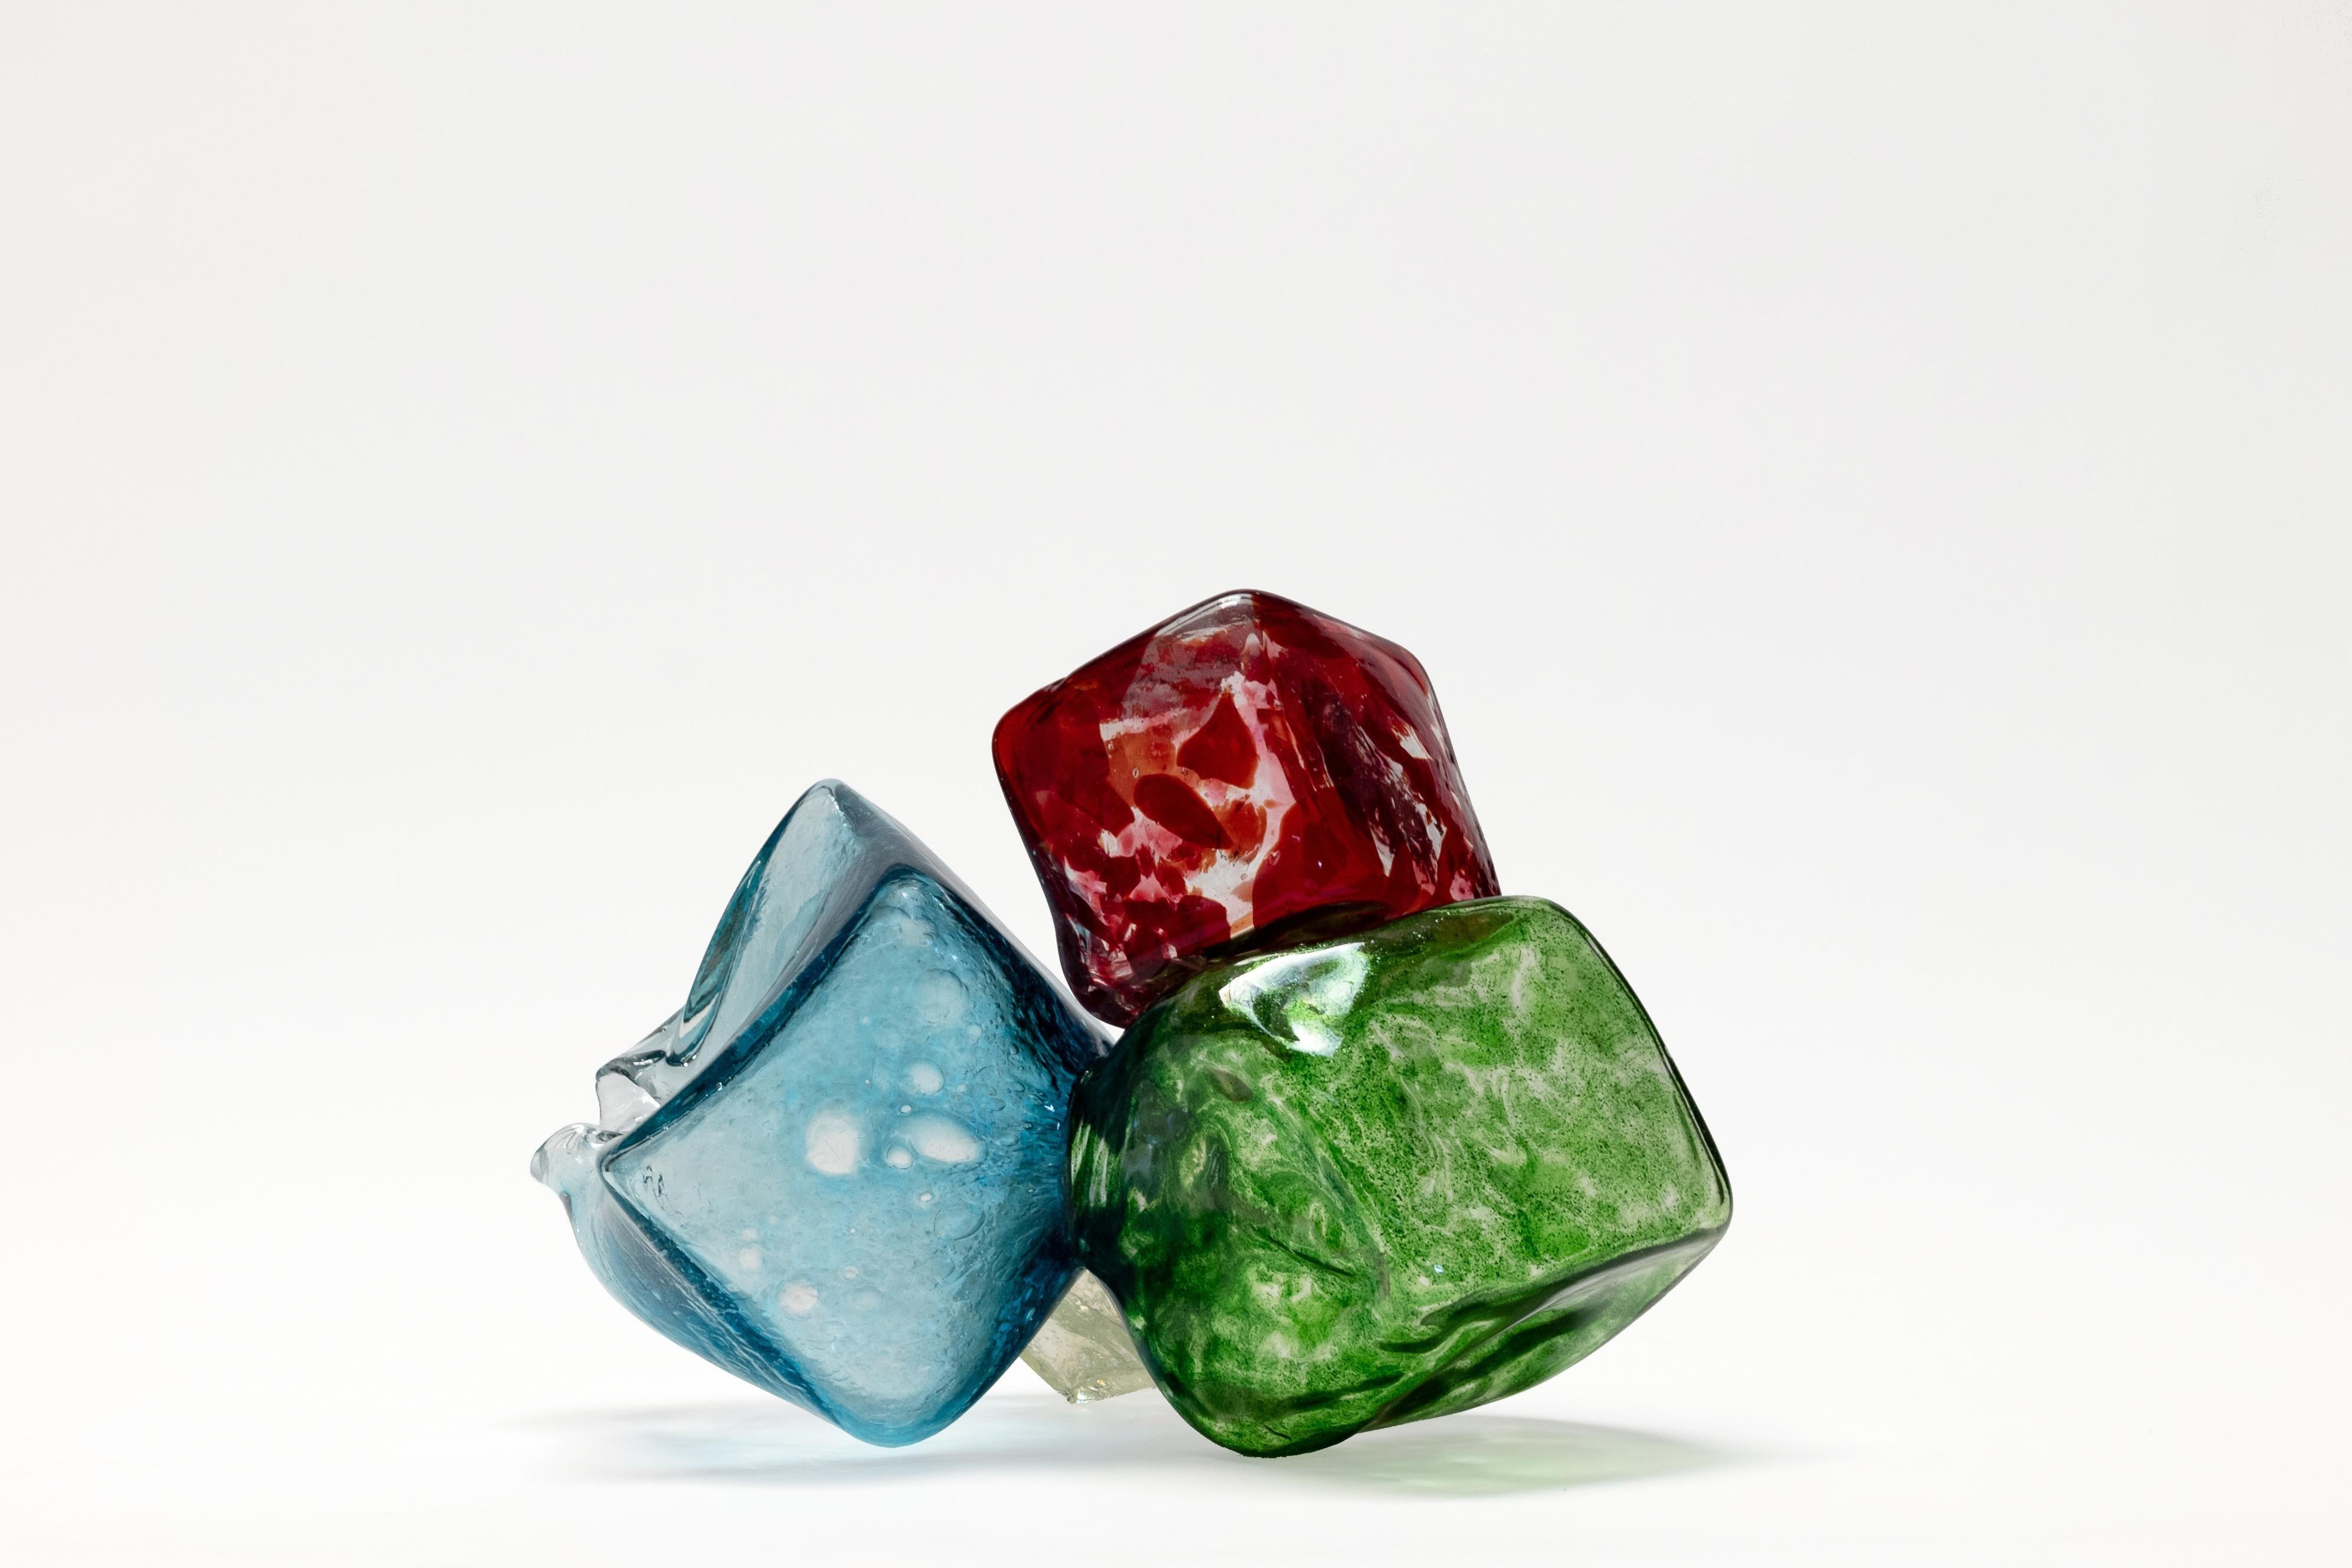 Twentieth Exhibitions is proud to present the début of Hydrochrom, a family of glass sculptures by LA-based artist and designer Sébastien Léon. Hydrochrom, stemming from the Greek expression for “The color of water” consists of tabletop sculptures,